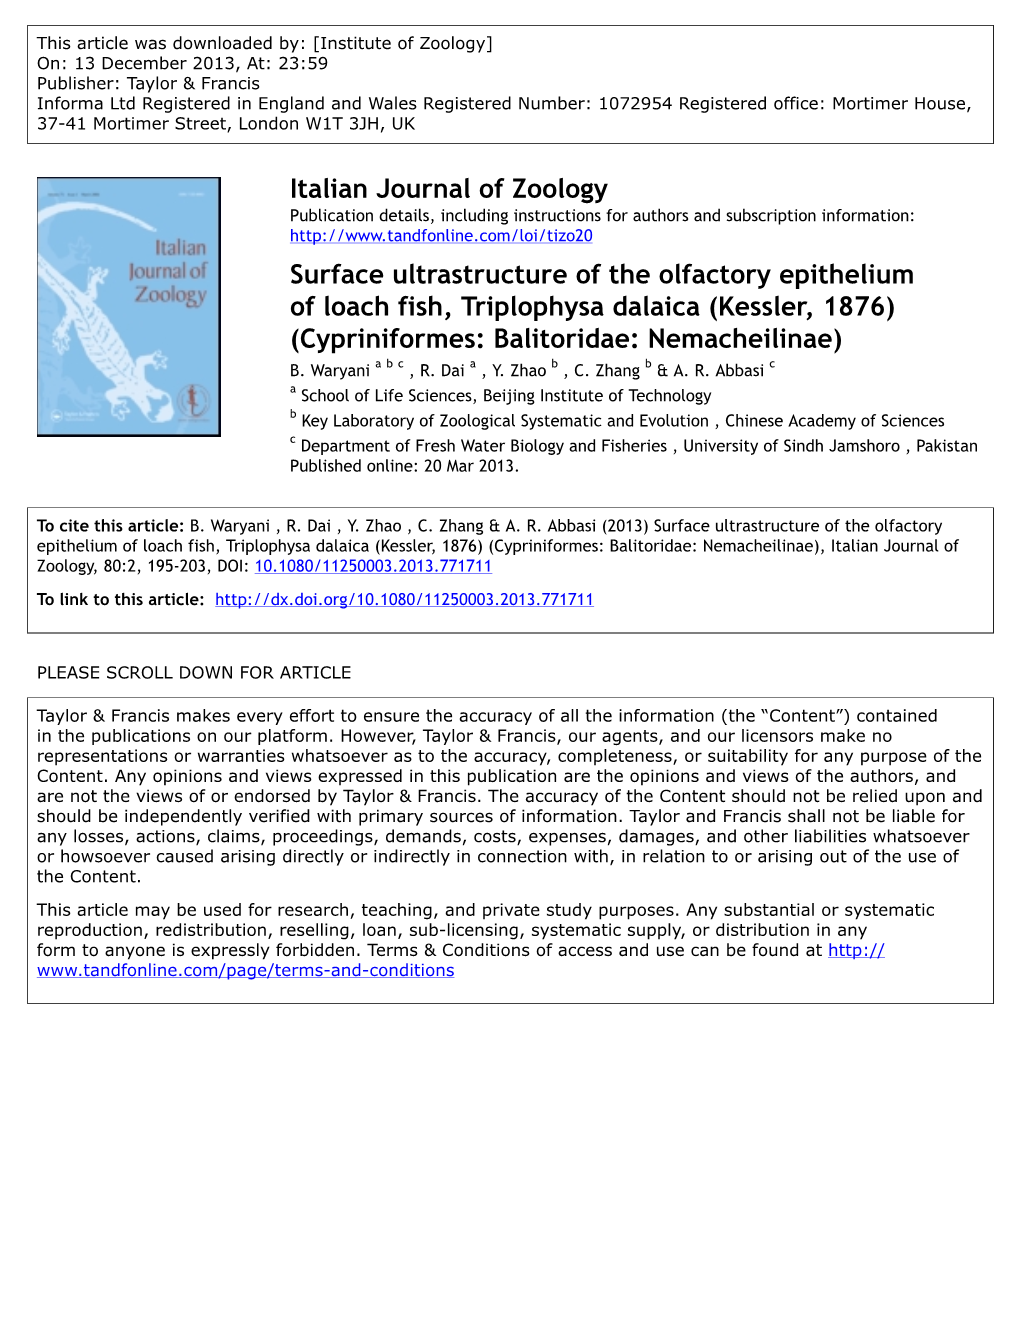 Italian Journal of Zoology Surface Ultrastructure of the Olfactory